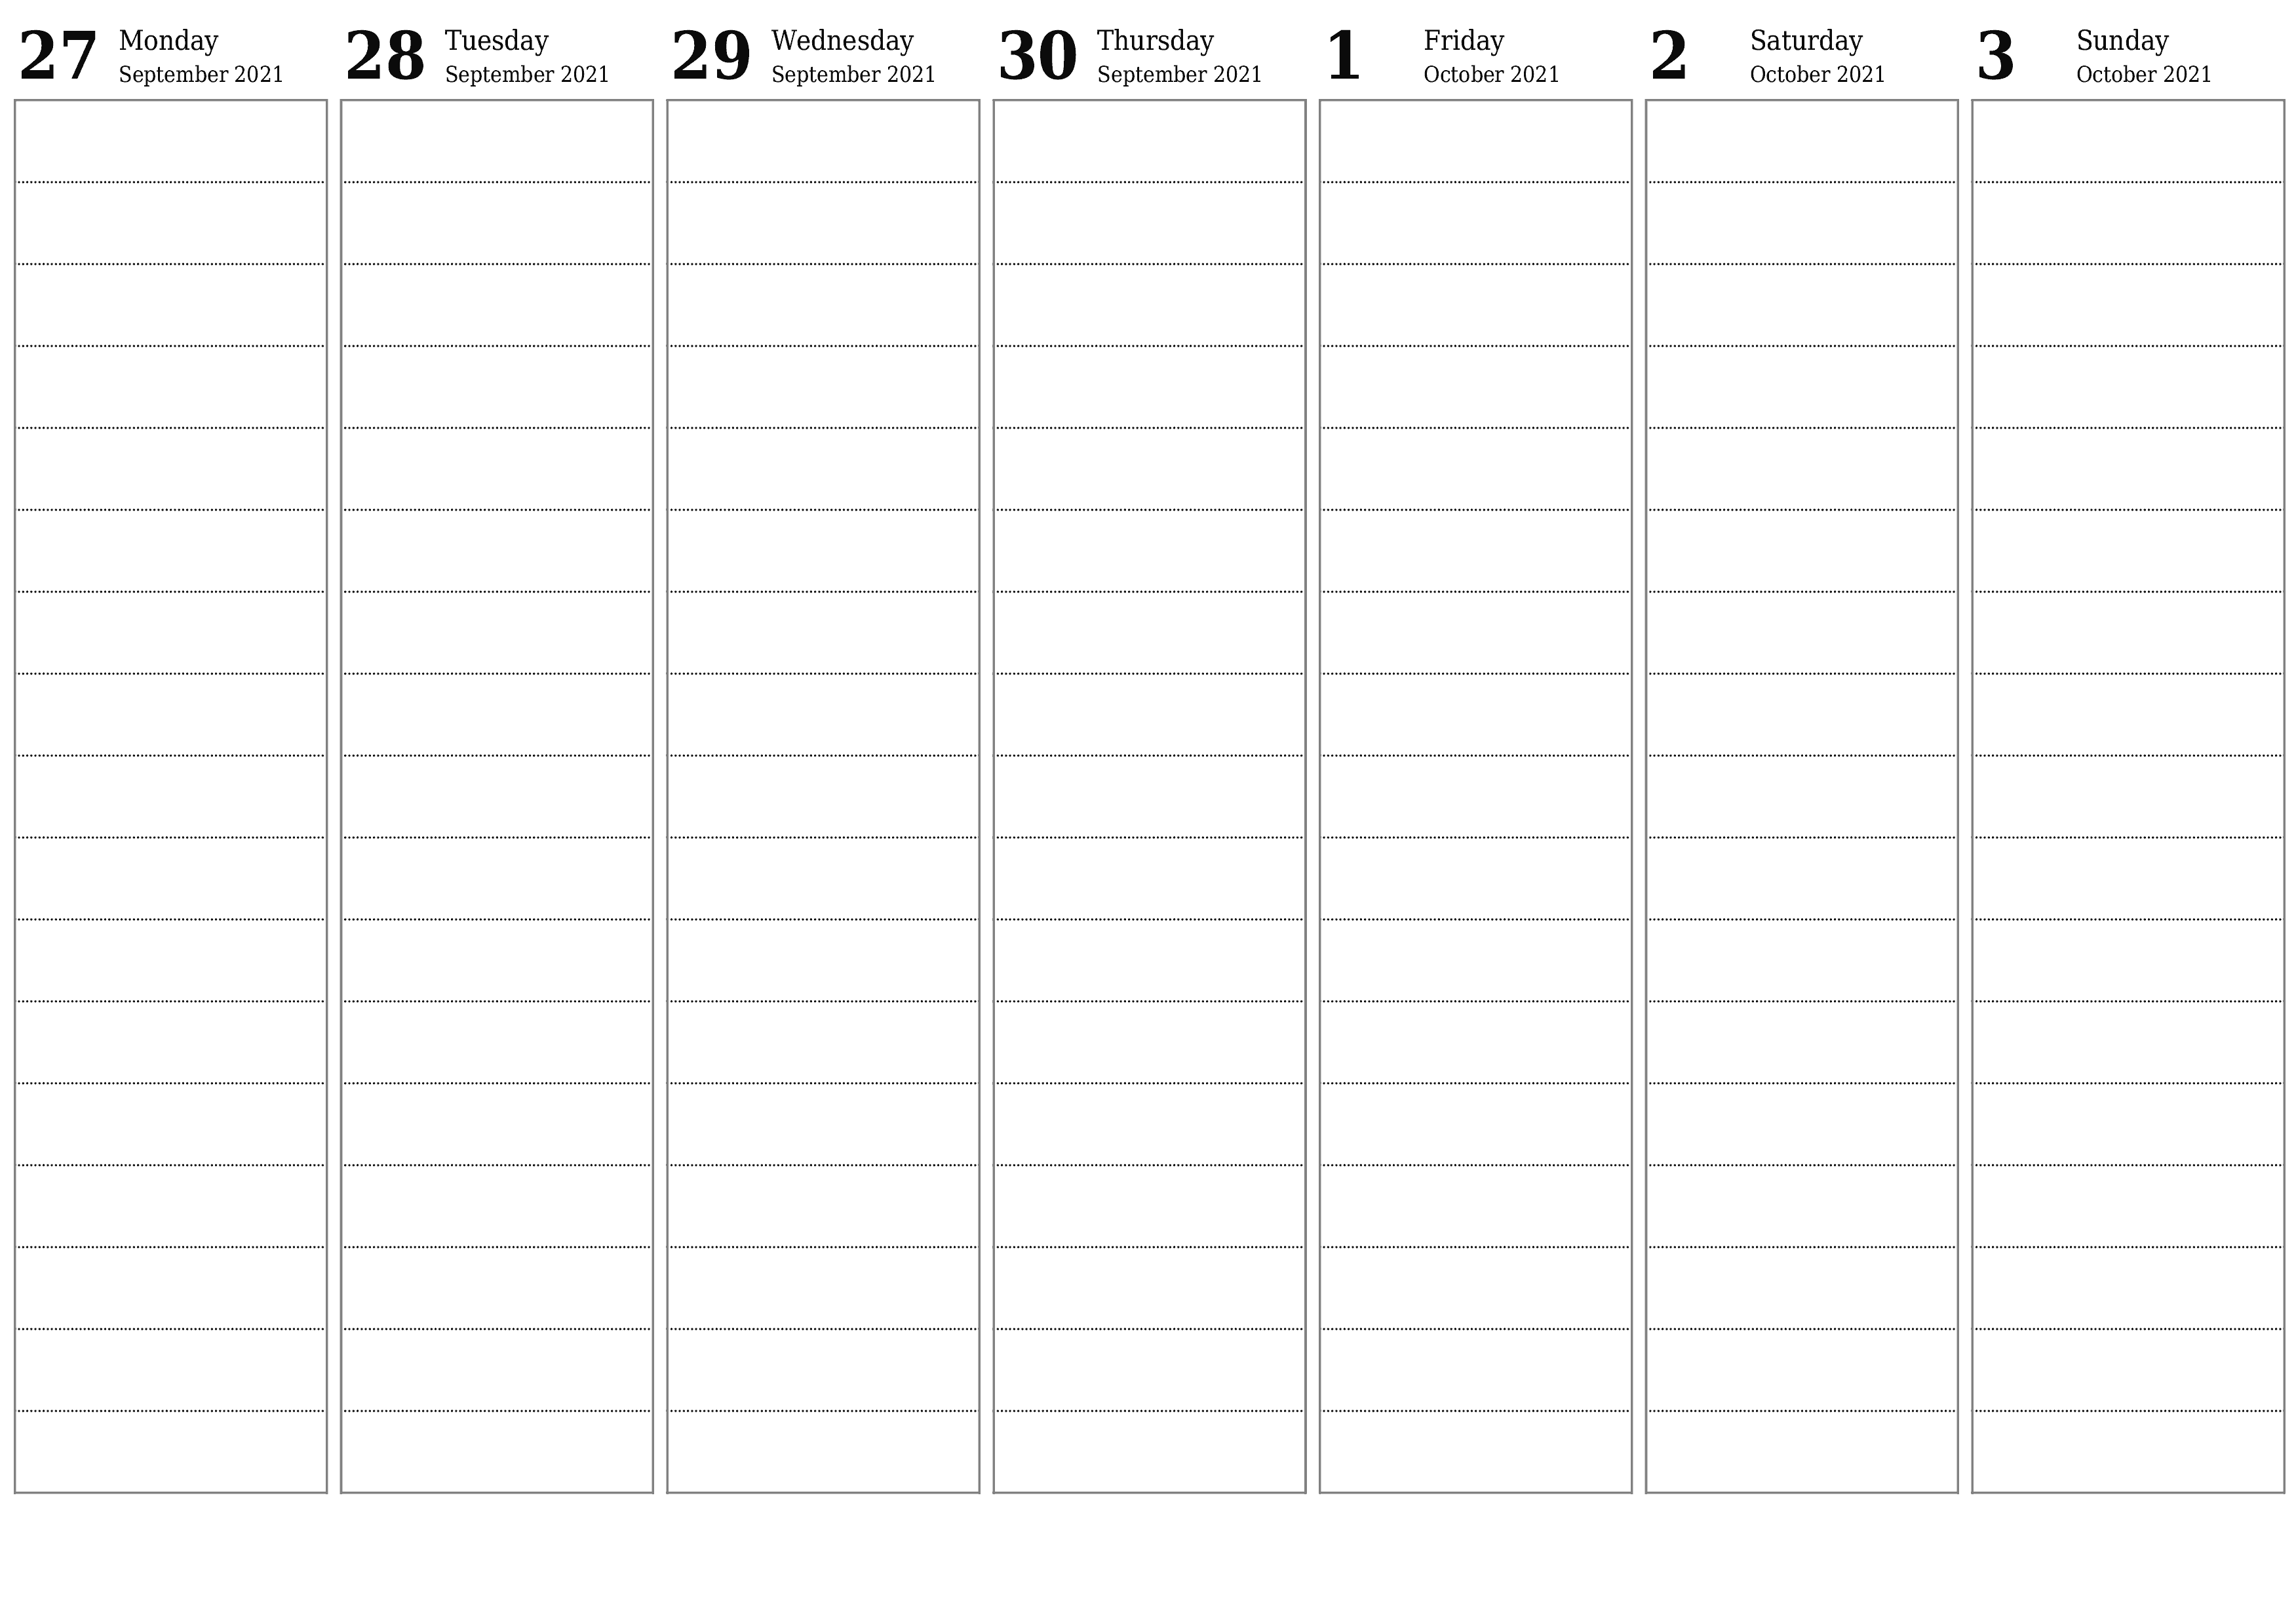 Blank weekly printable calendar and planner for week October 2021 with notes, save and print to PDF PNG English - 7calendar.com